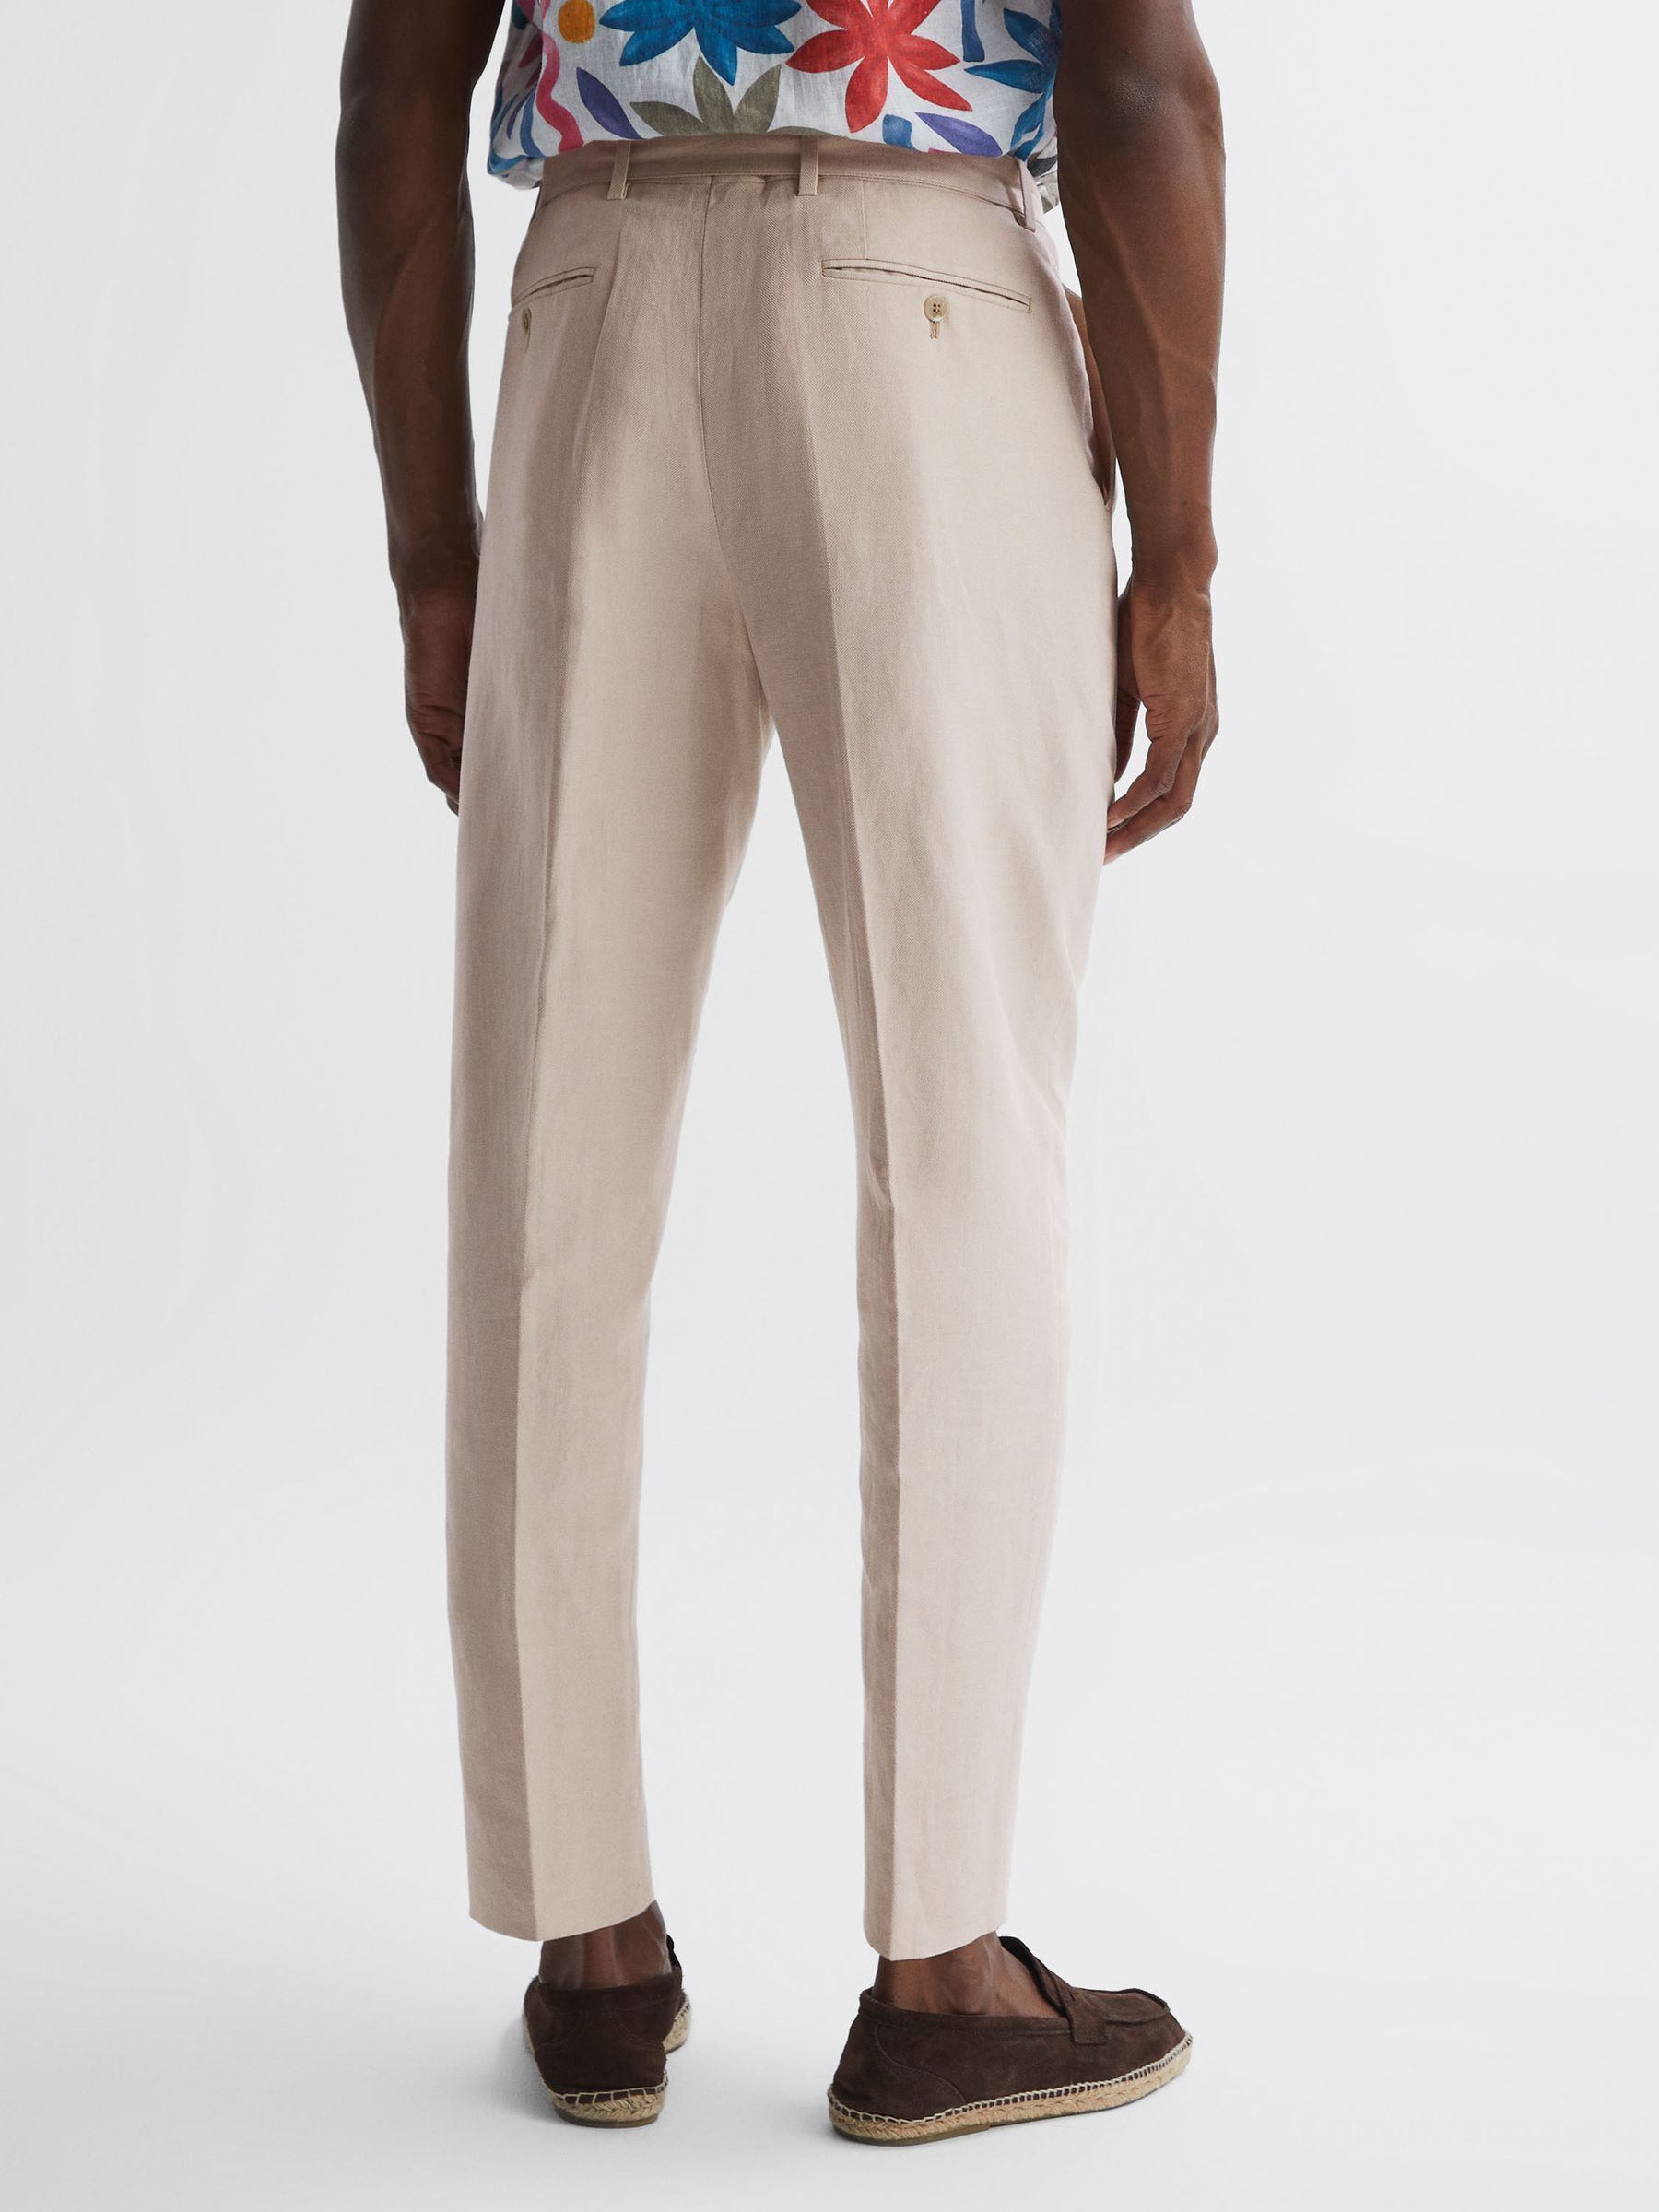 Reiss Trail Cotton-Linen Buckled Trousers - REISS